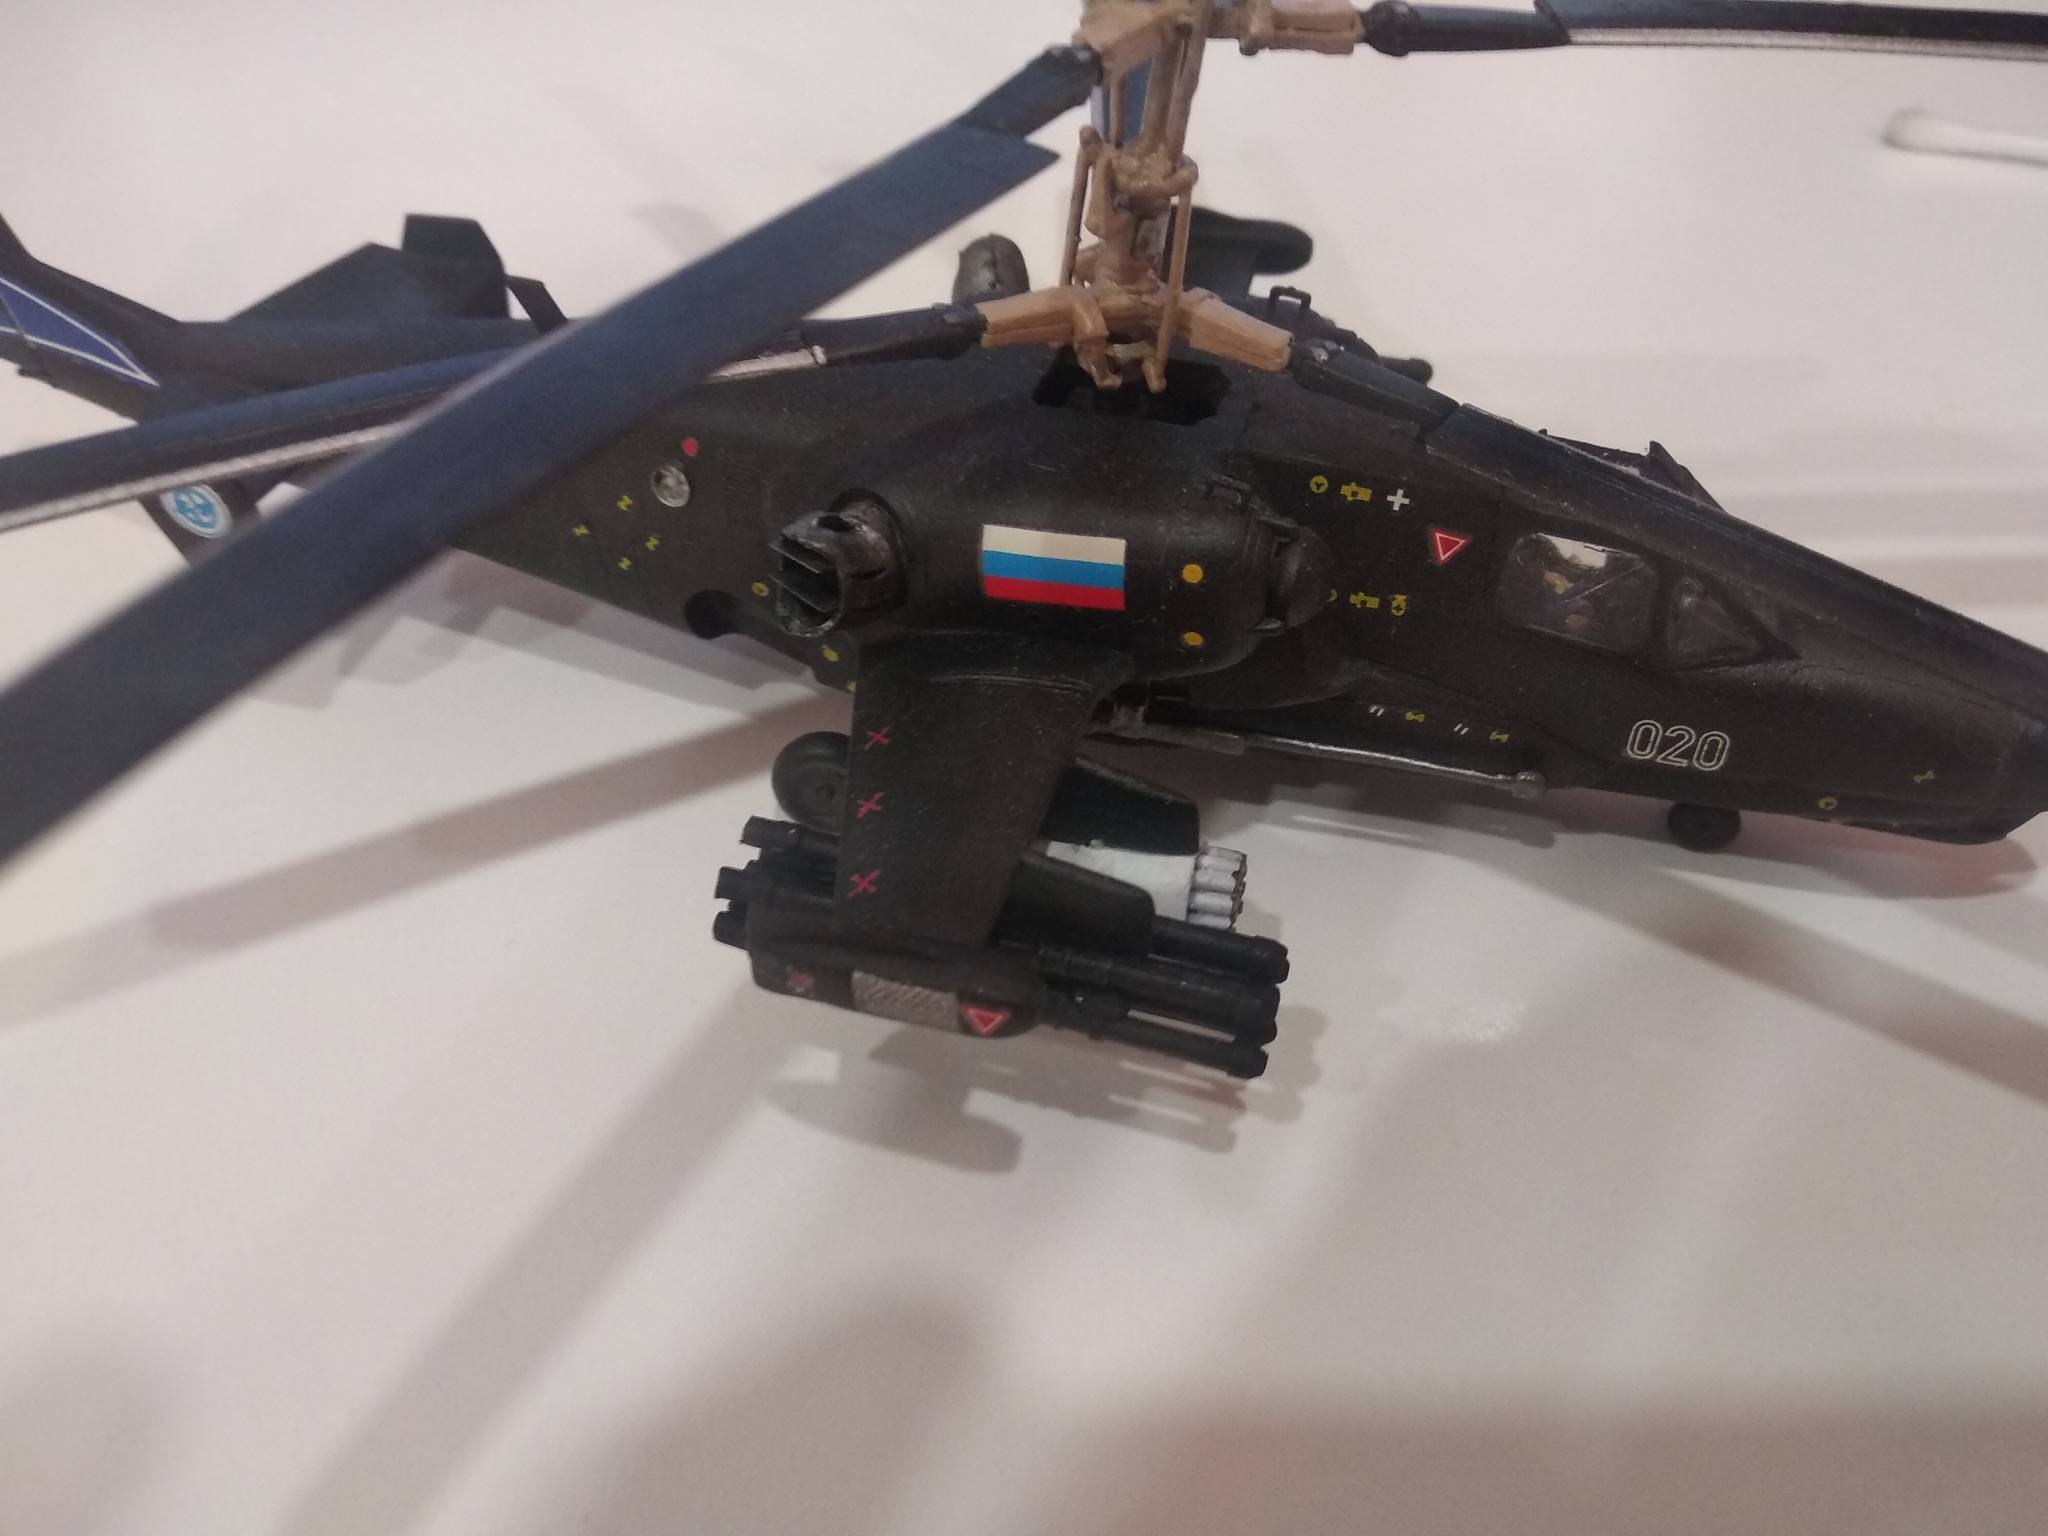 KA-50 ARMY ATTACK HELICOPTER from the star - My, Helicopter, Prefabricated model, Star, Longpost, Aircraft modeling, Aviation, Scale model, Models, Stars